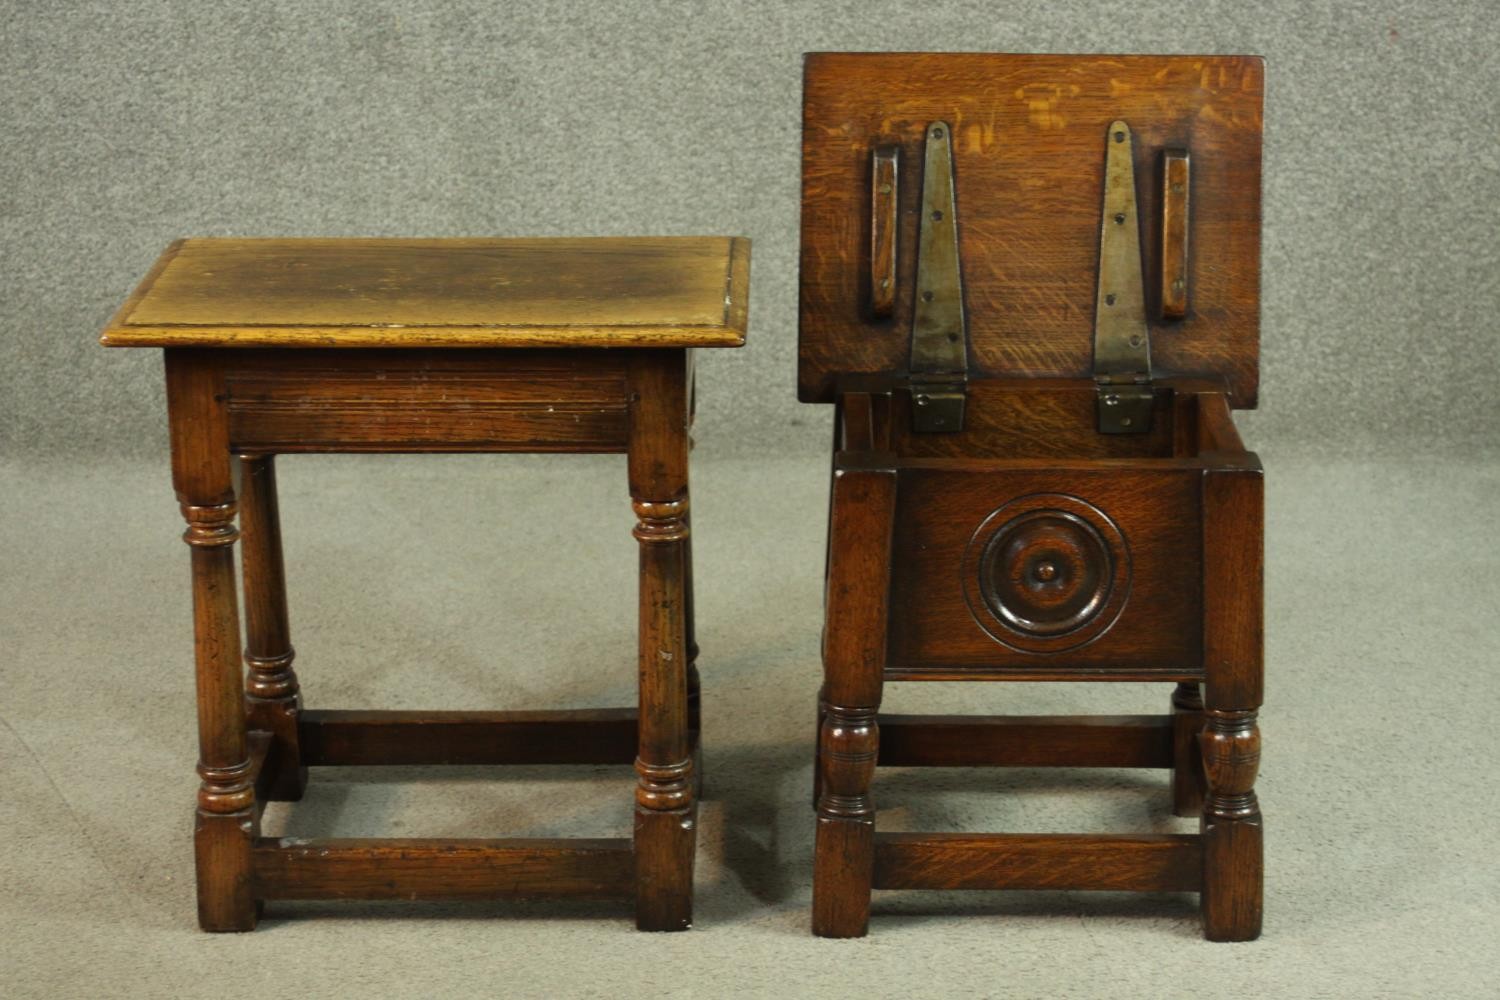 Two oak joint stools, 20th century, both rectangular, on turned legs with stretchers, one with a - Image 2 of 6